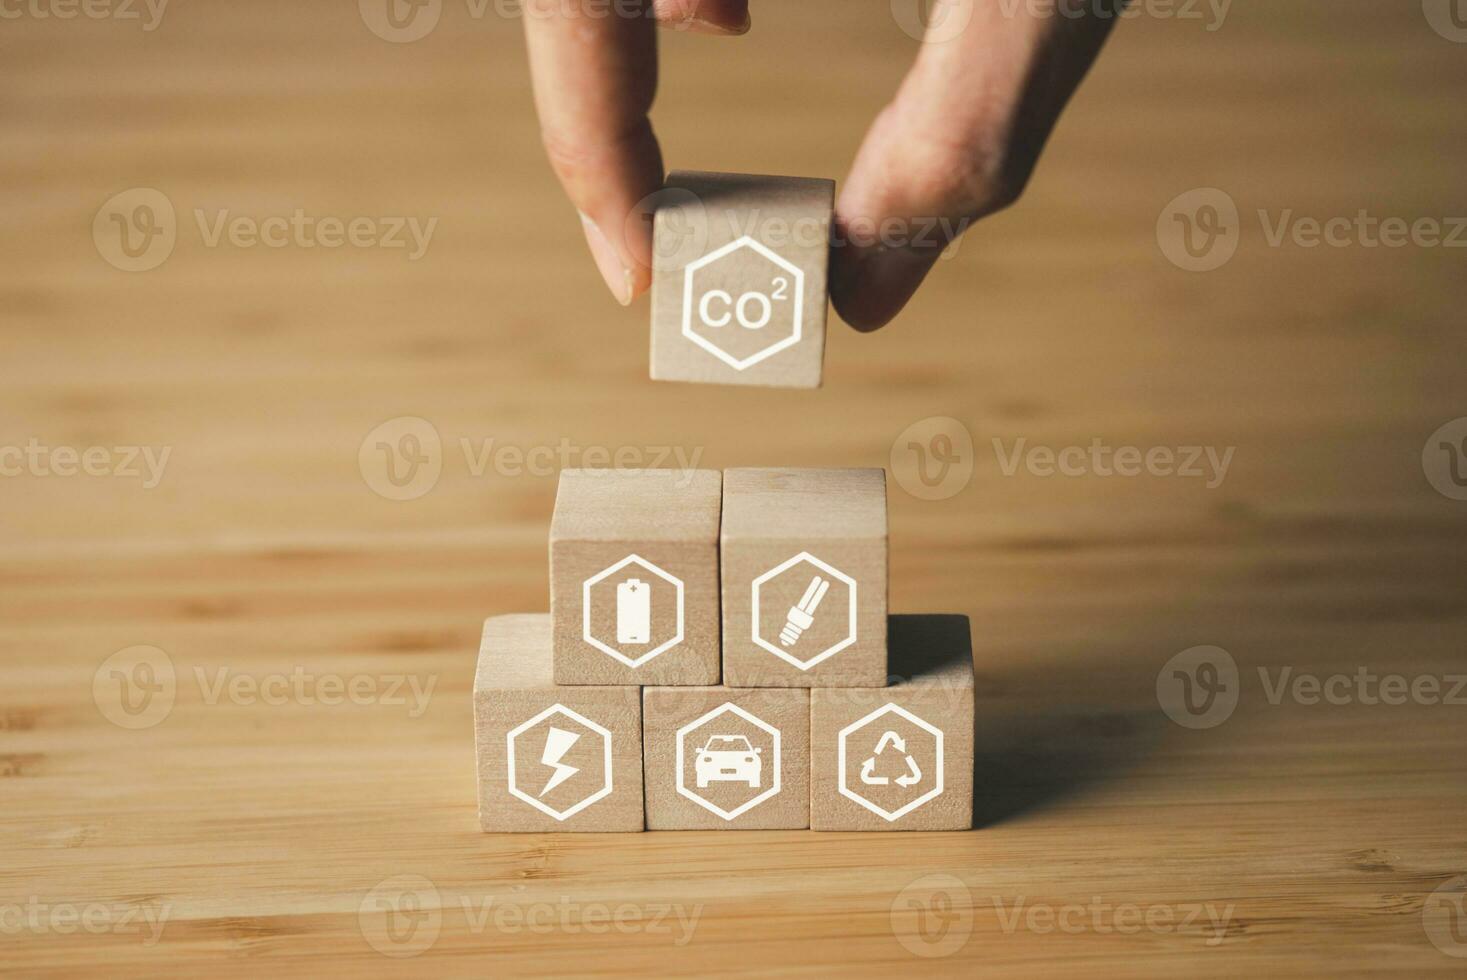 Wooden block of CO2 emission reduction icons. environment, global warming, CO2, sustainable energy concept. photo